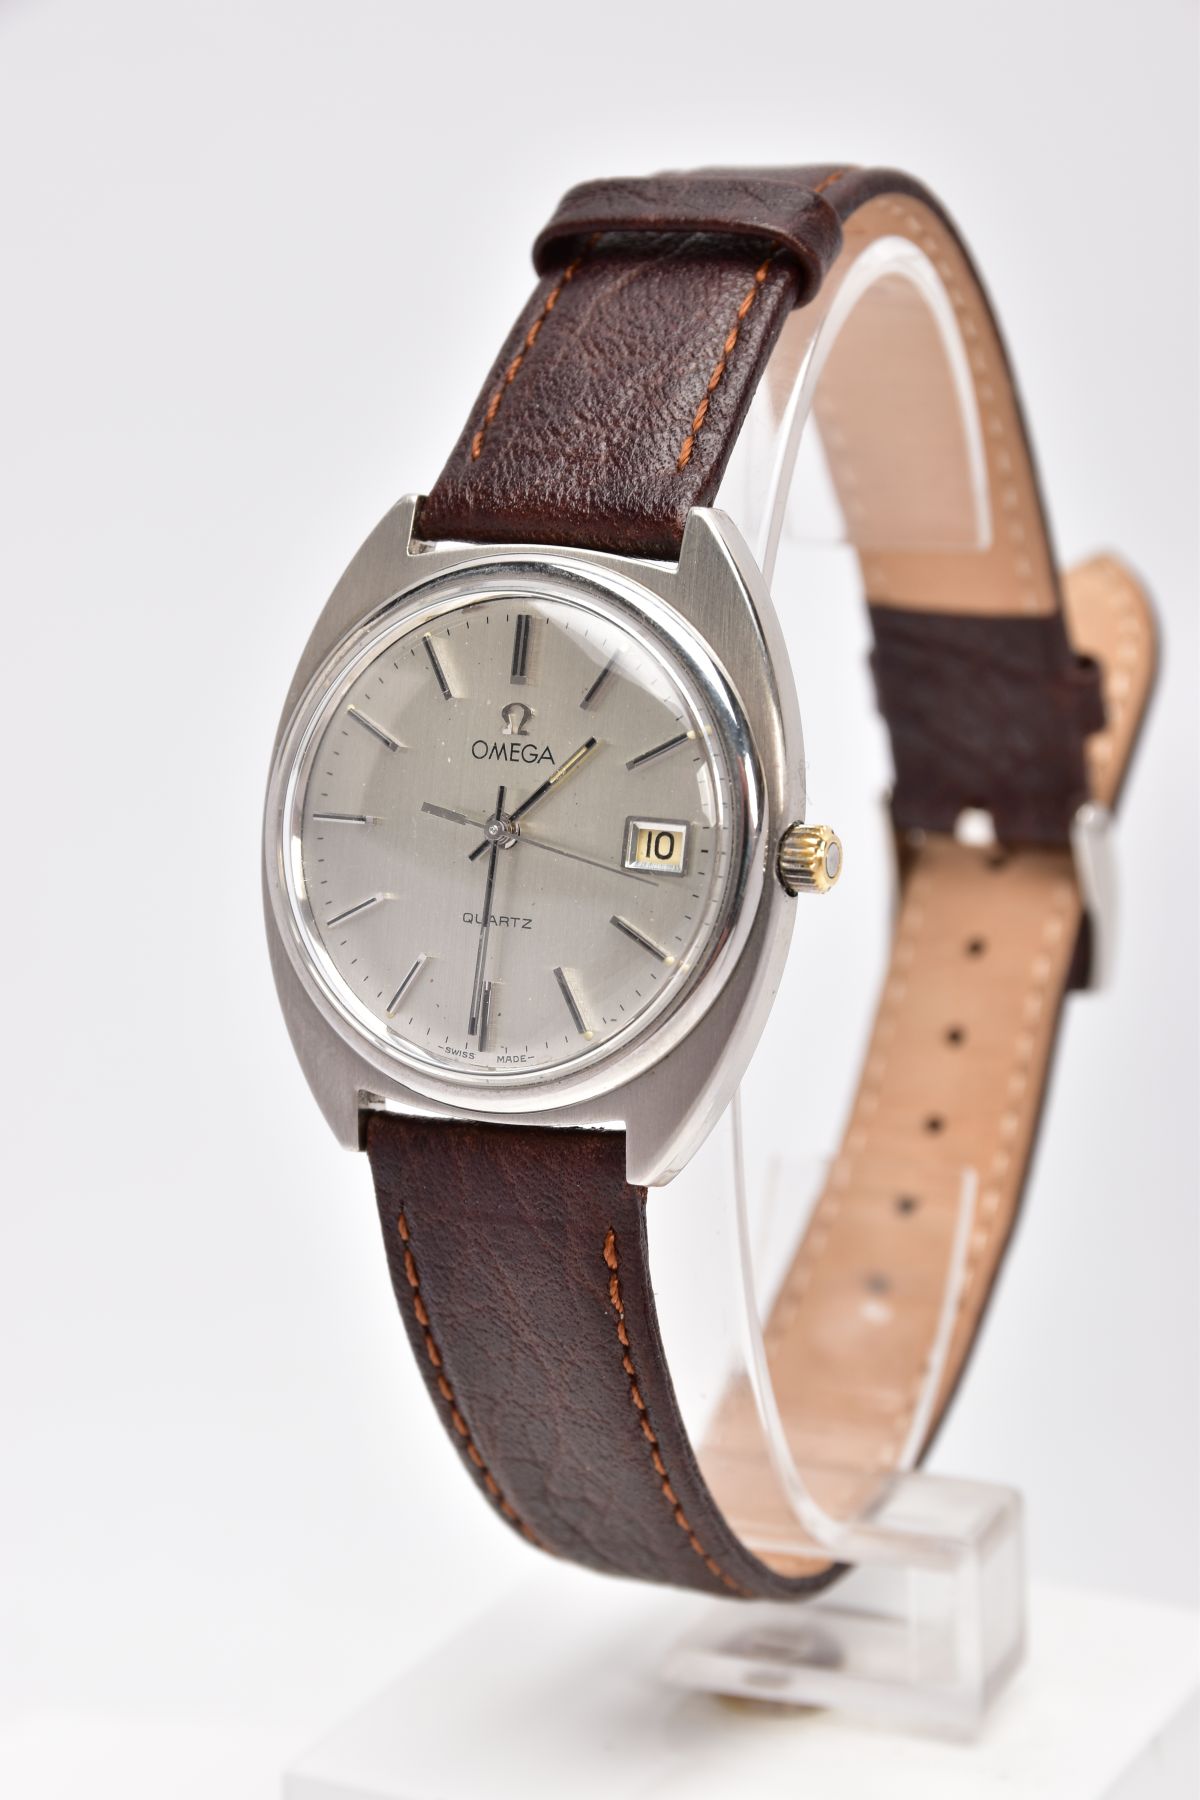 A GENTLEMAN'S OMEGA WRISTWATCH WITH BOX, the quartz watch with circular face, baton markers, date - Image 2 of 6